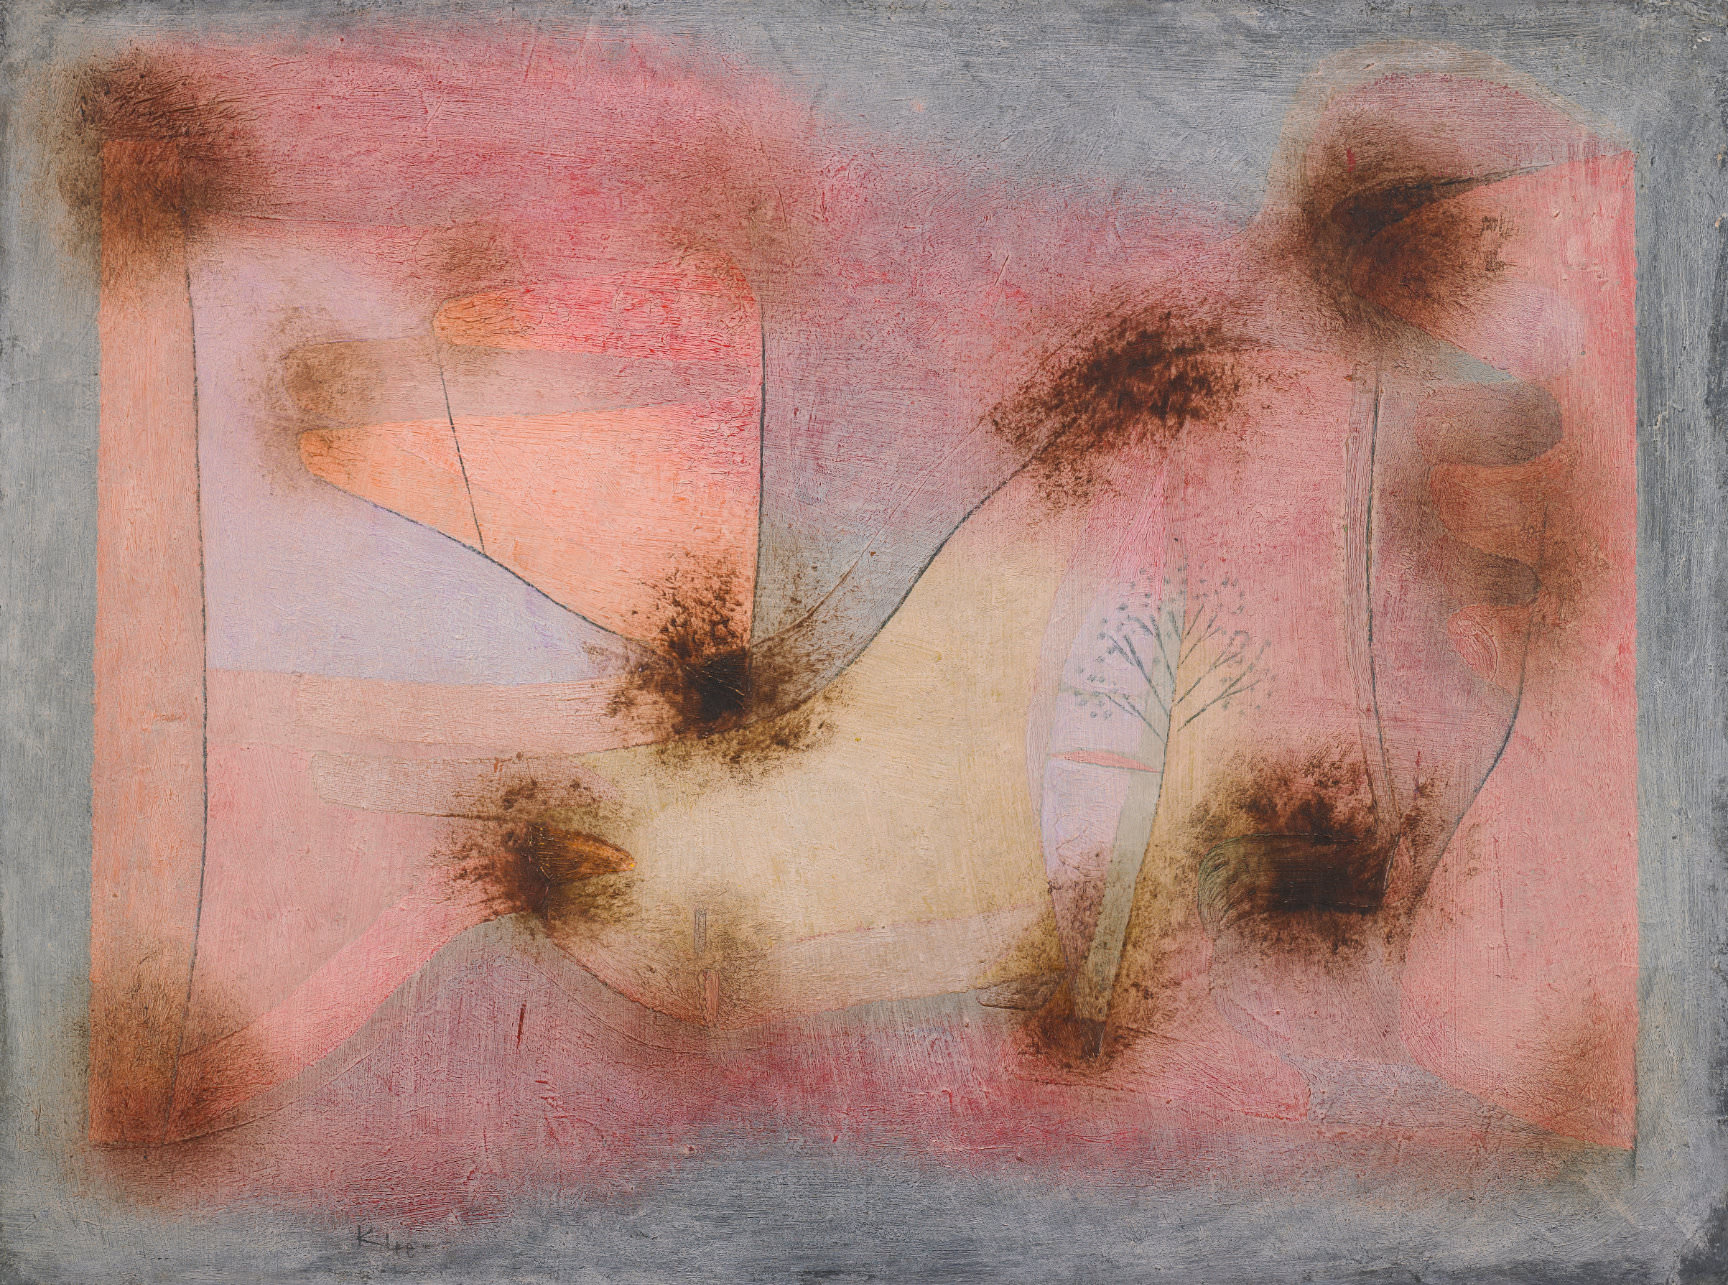  fig. 1 Paul Klee,&nbsp; harte Pflanzen  [Hard Plants], 1934, 212 , oil and watercolour on cardboard, 41,2 x 55,2 cm, The Minneapolis Institute of Arts, Gift of Mr. und Mrs. Donald Winston, © The Minneapolis Institute of Arts 